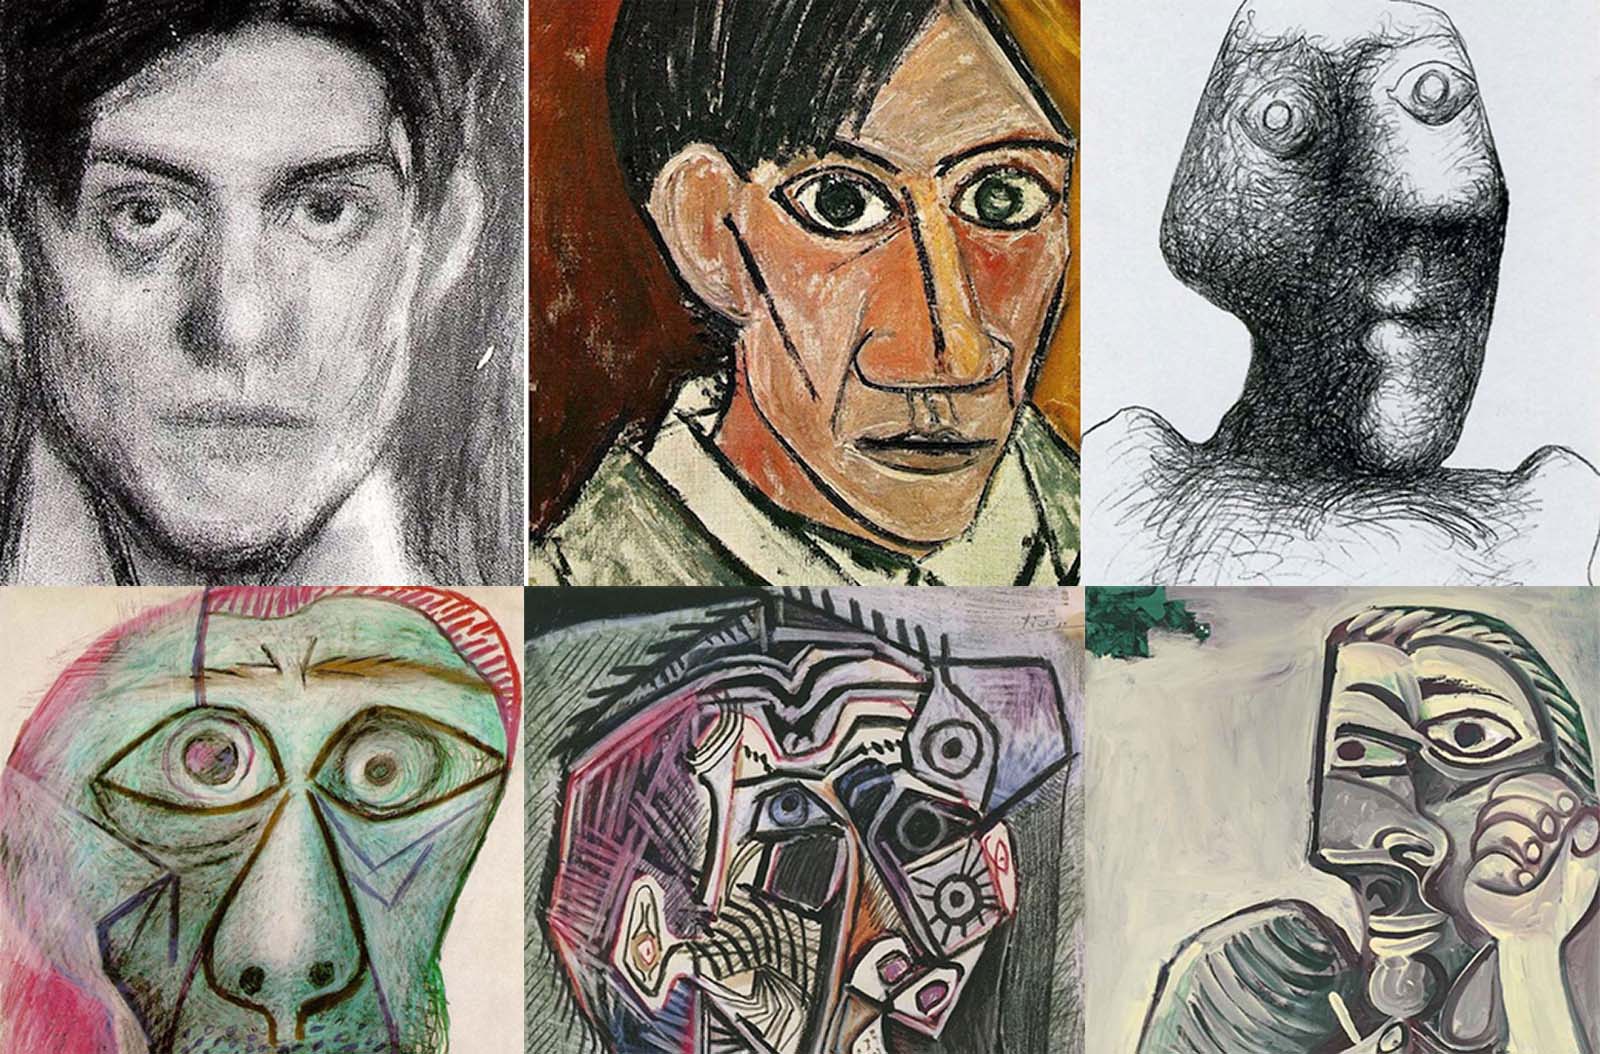 Picasso’s self-portraits are important because they span his entire career, and we can trace how his manner of self-depiction changed over time. It�